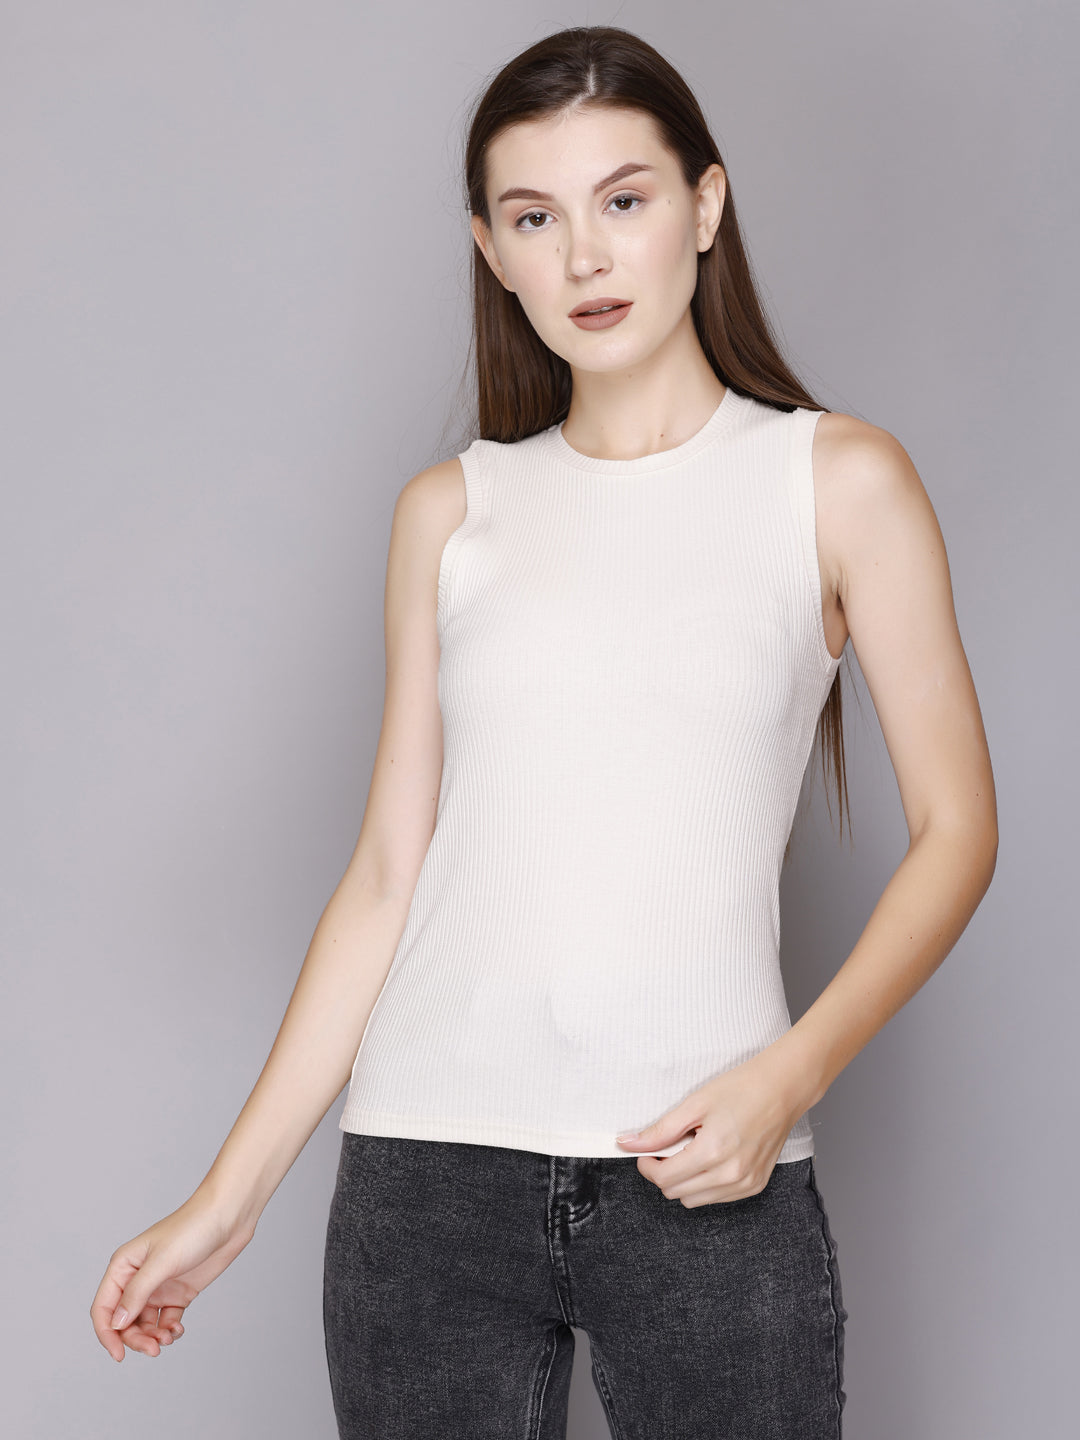 Stylish Modish Rib Tank Top For Women/ Girls Online In India At Best Prices